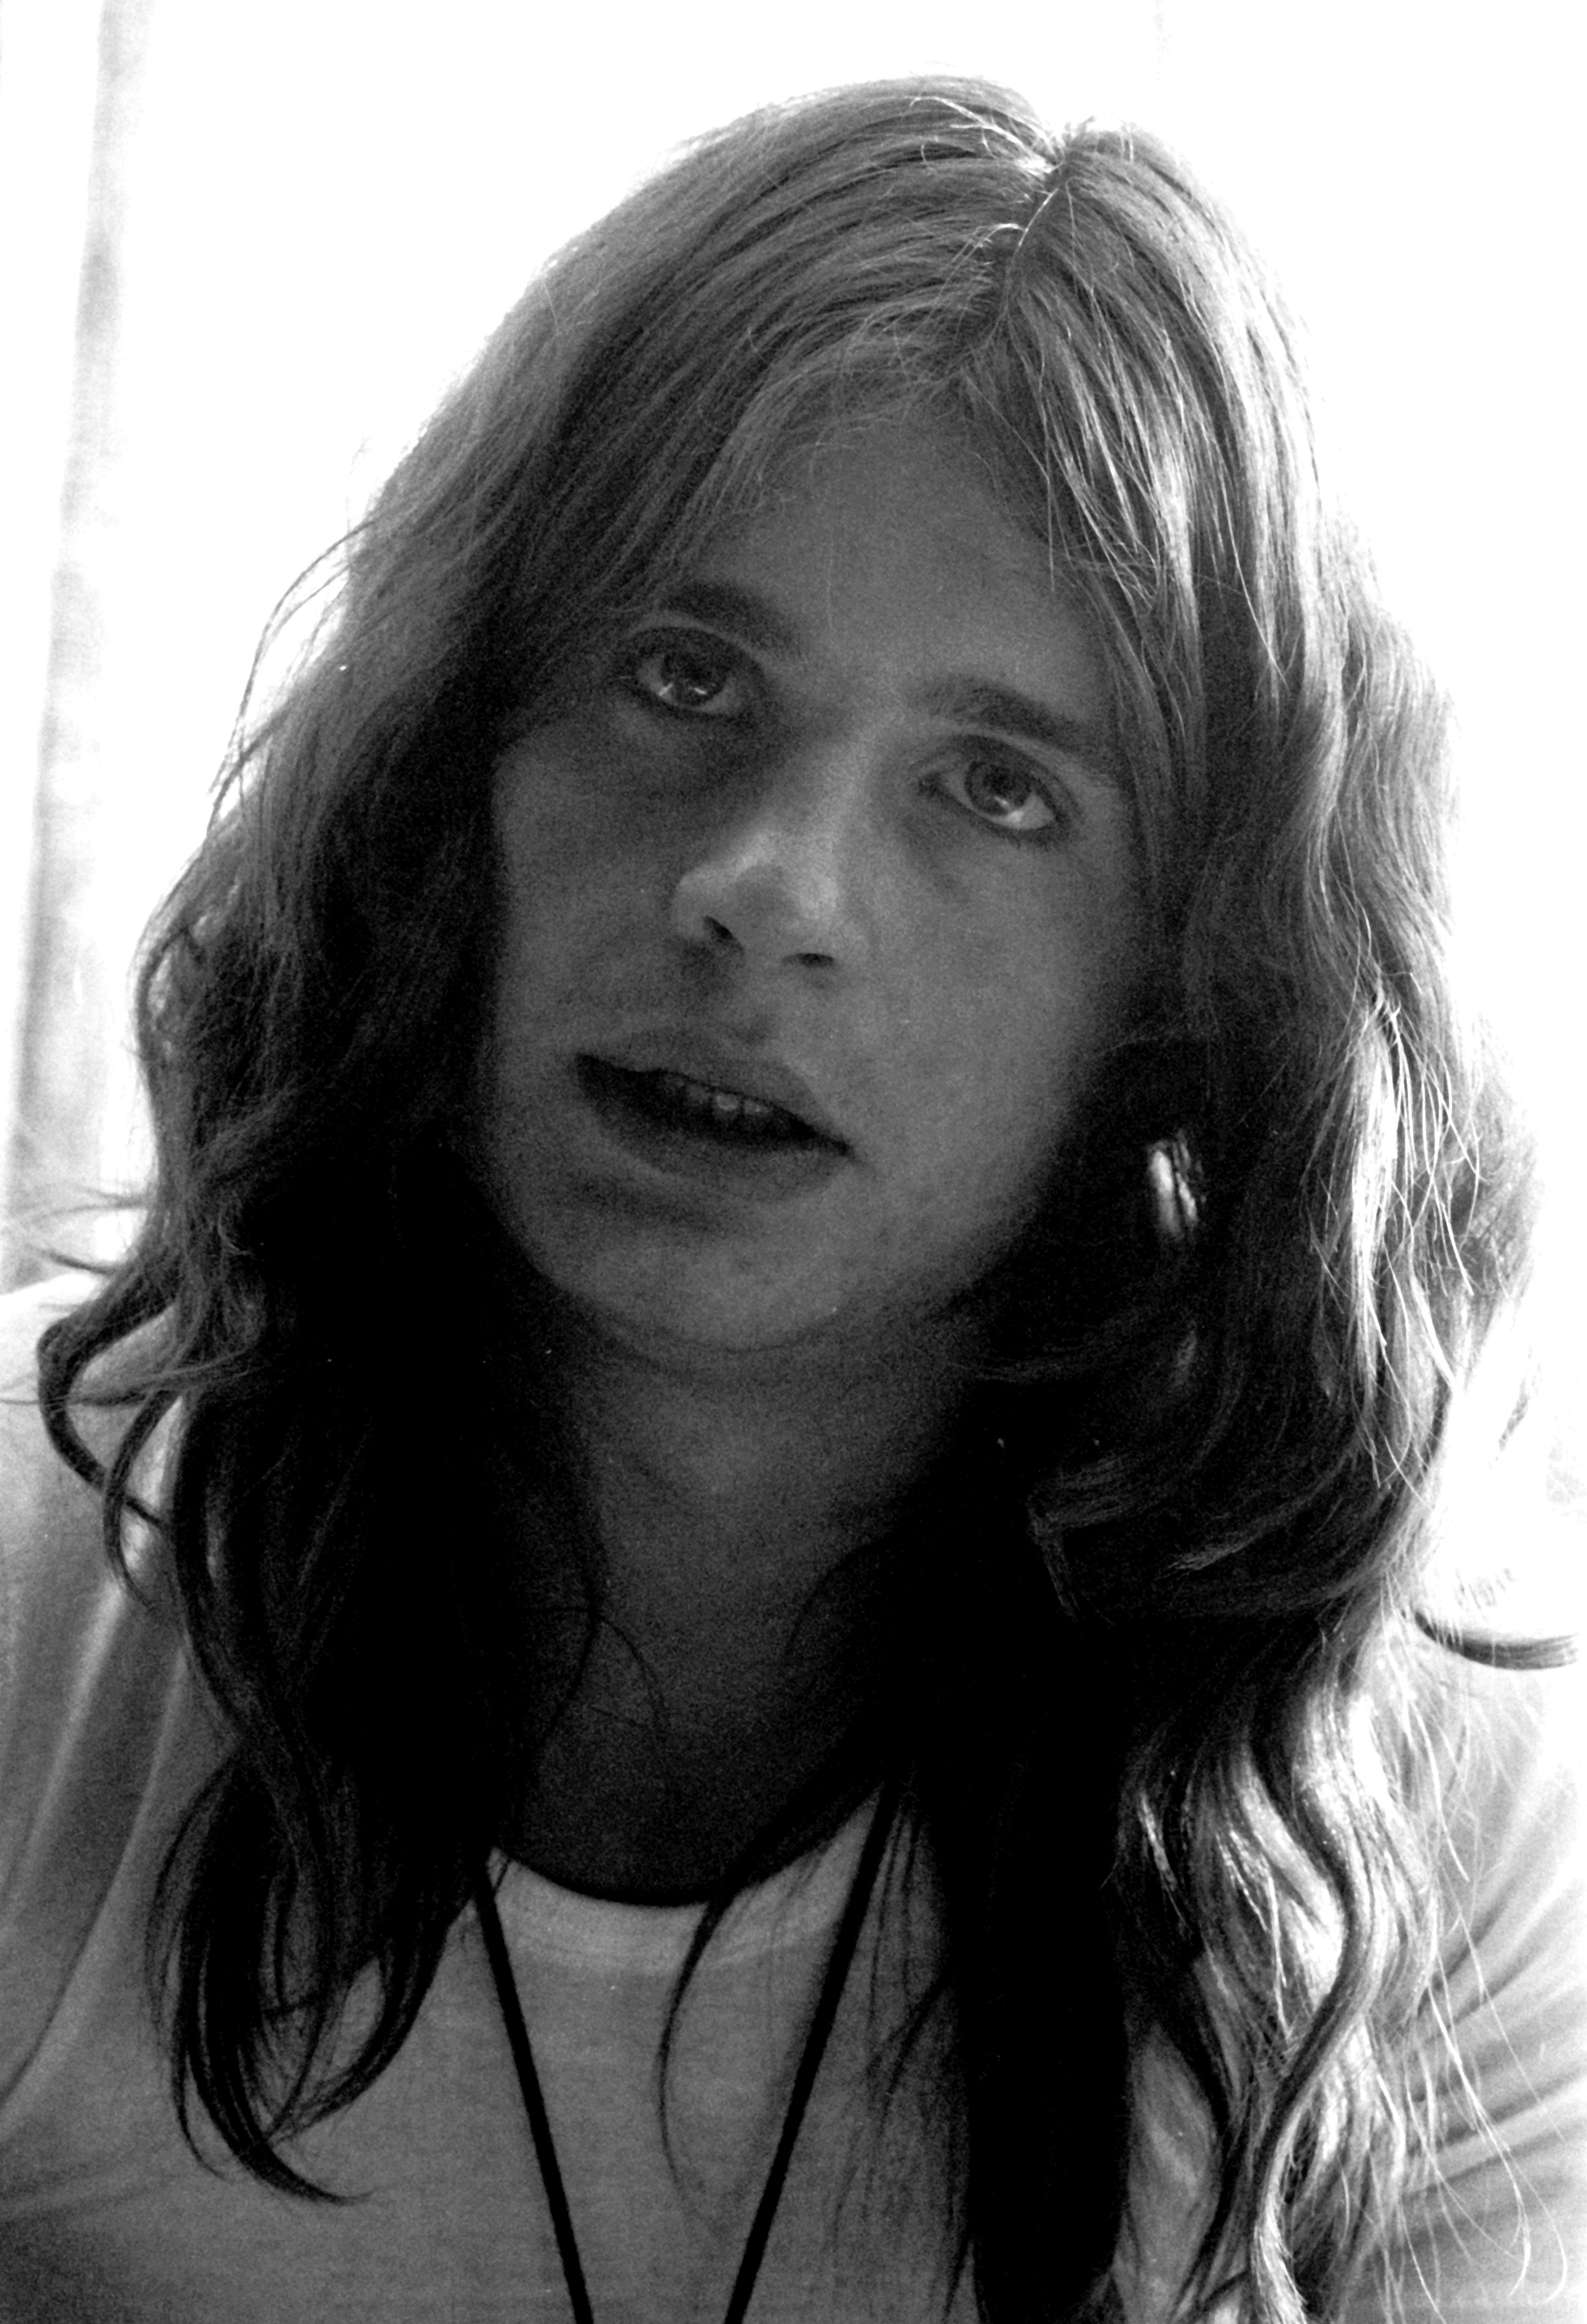 Ozzy Osbourne poses on January 1, 1972 | Source: Getty Images